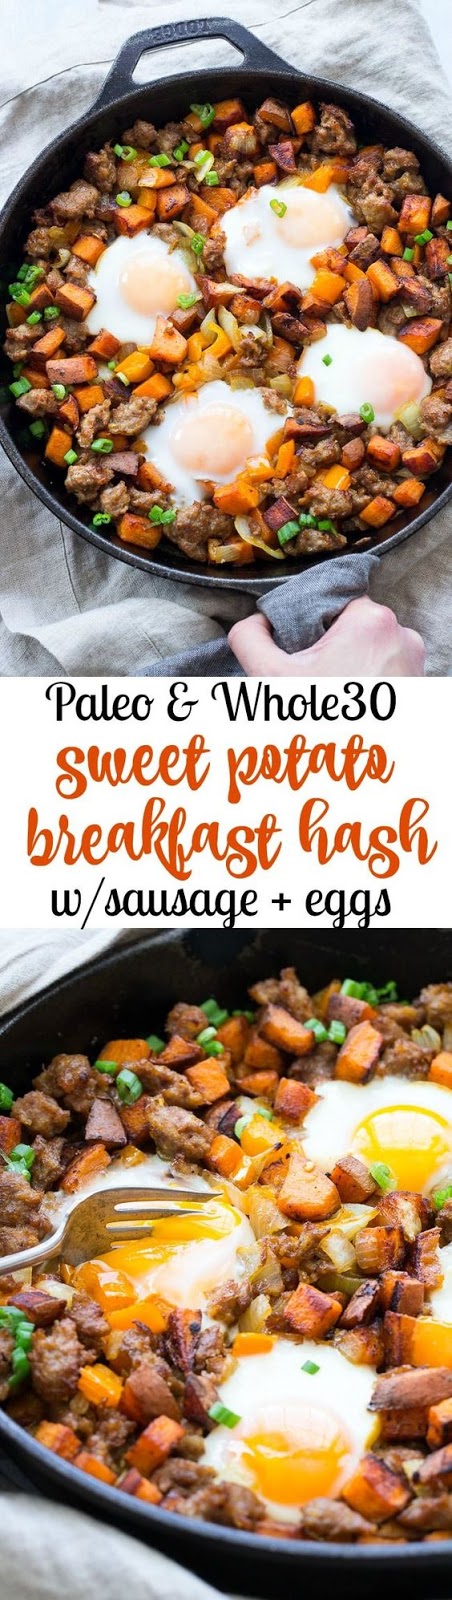 This skillet sweet potato hash with sausage and eggs is a filling, savory, healthy meal for any time of day. Sweet potatoes, onions, peppers and sausage with eggs cooked right into the hash, it’s Paleo and Whole30 friendly plus absolutely delicious!